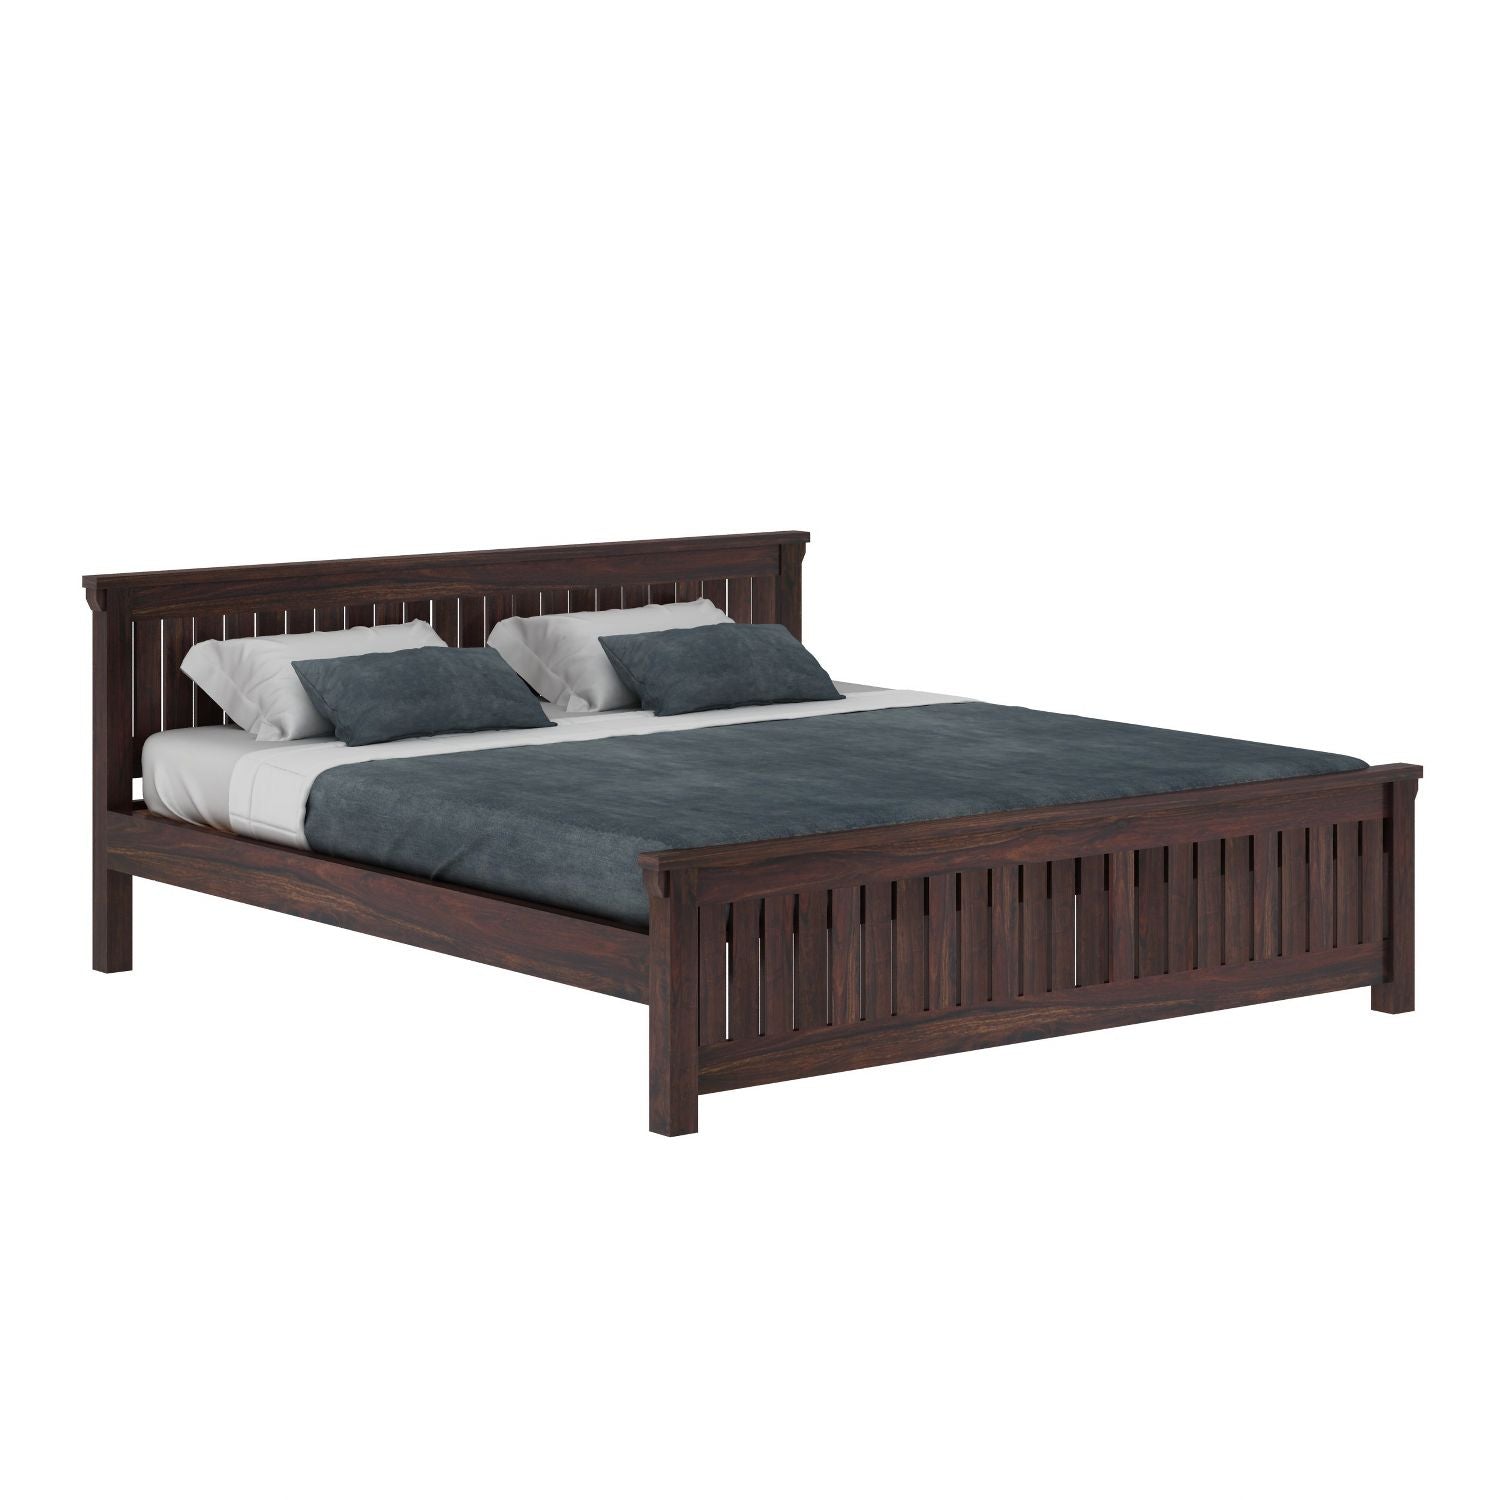 Trinity Solid Sheesham Wood Bed Without Storage (Queen Size, Walnut Finish)